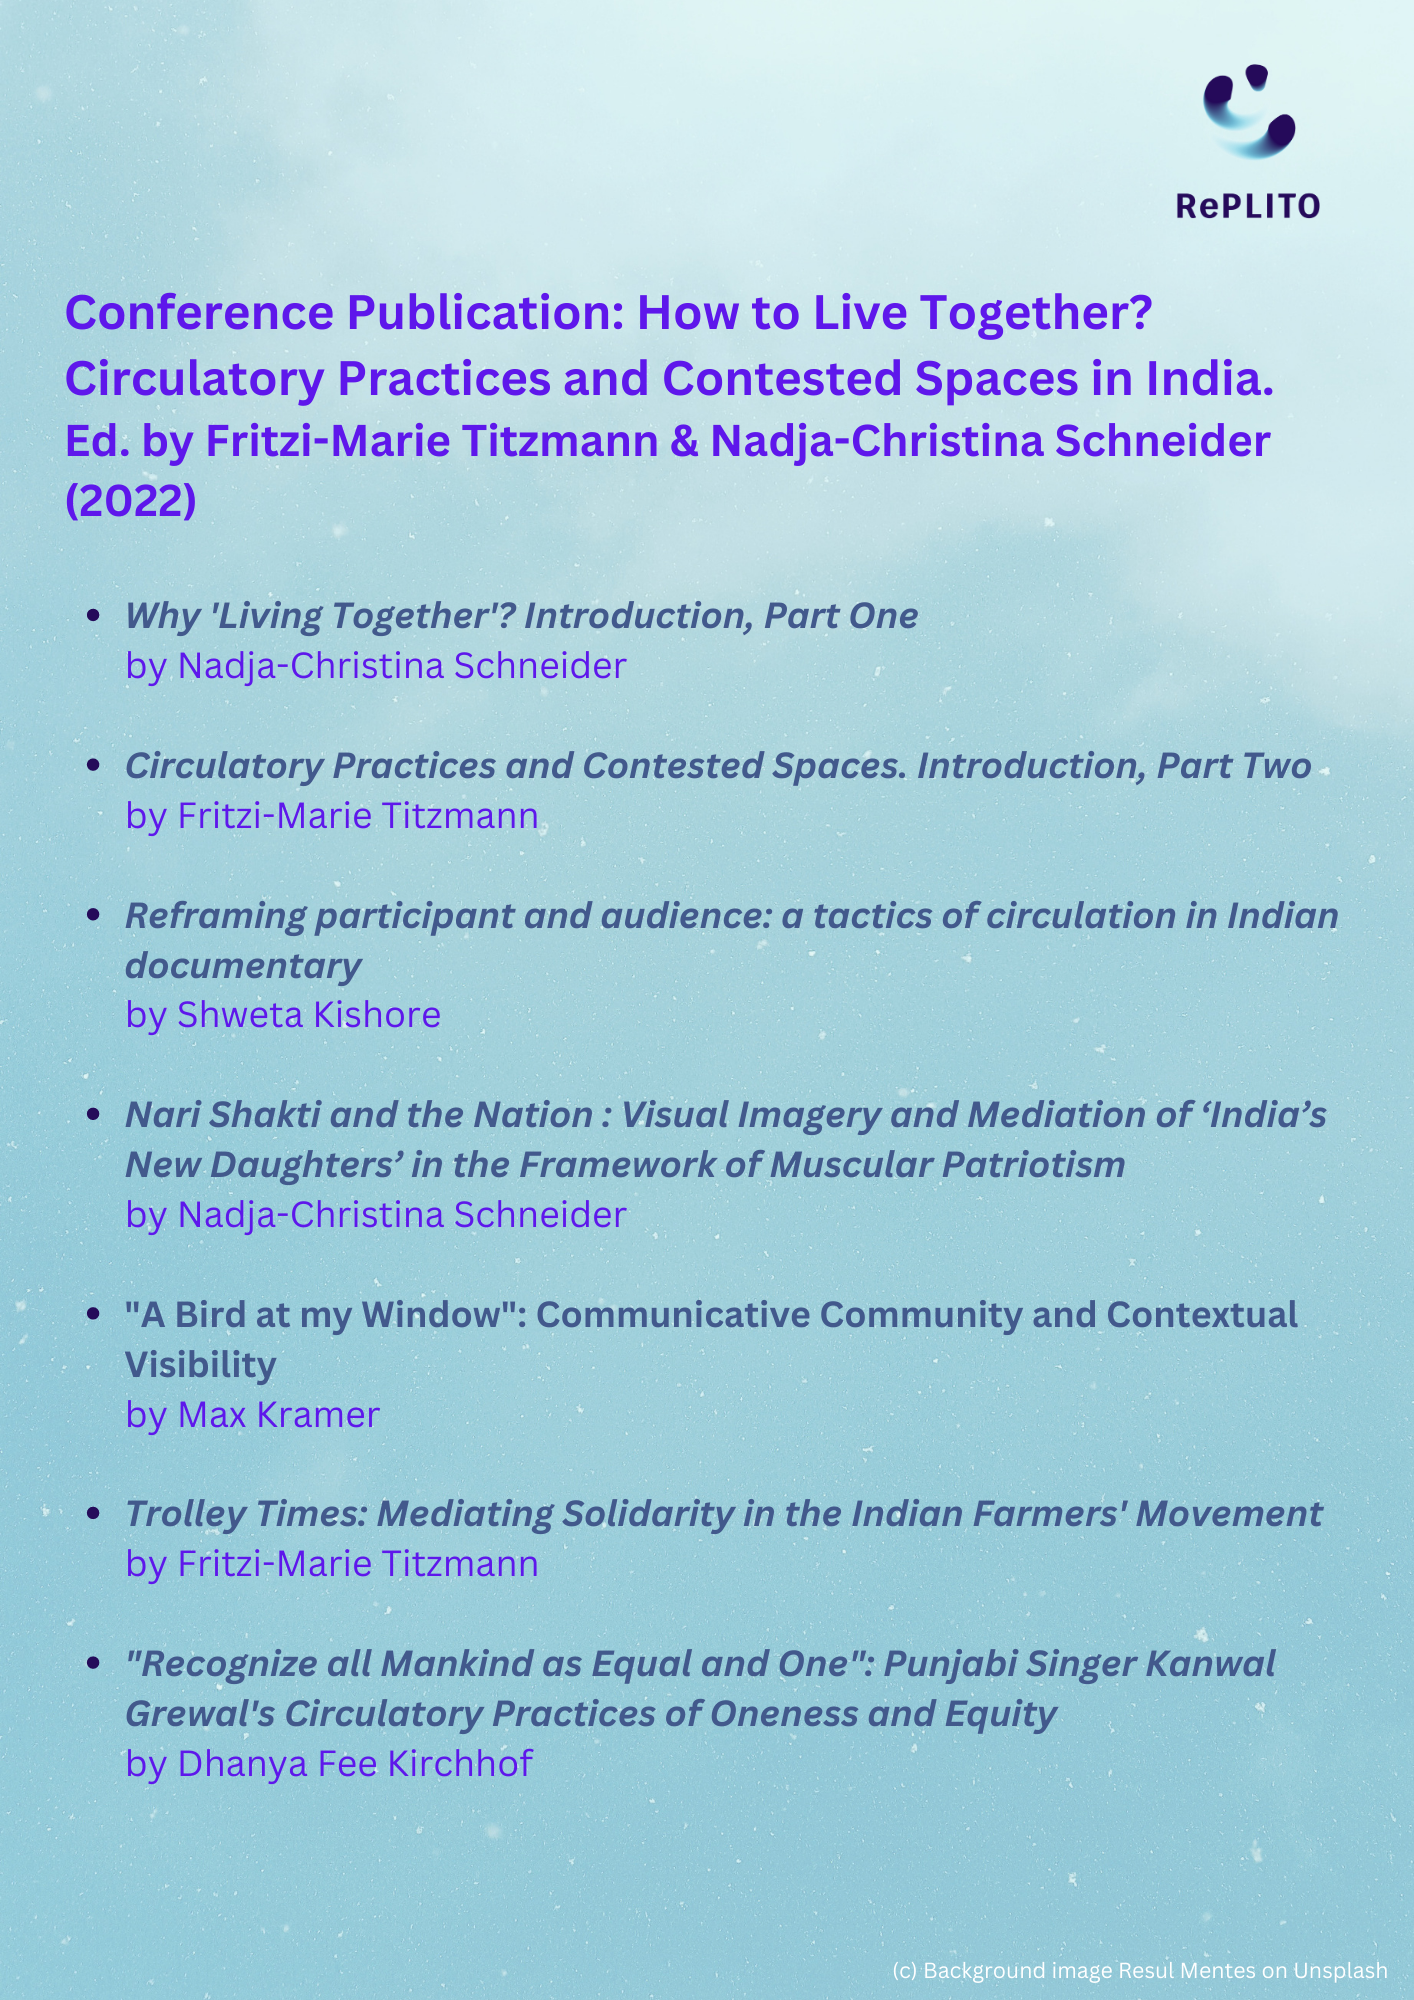 Conference Publication How to Live Together Circulatory Practices and Contested Spaces in India. Ed. by Fritzi-Marie Titzmann & Nadja-Christina Schneider.png